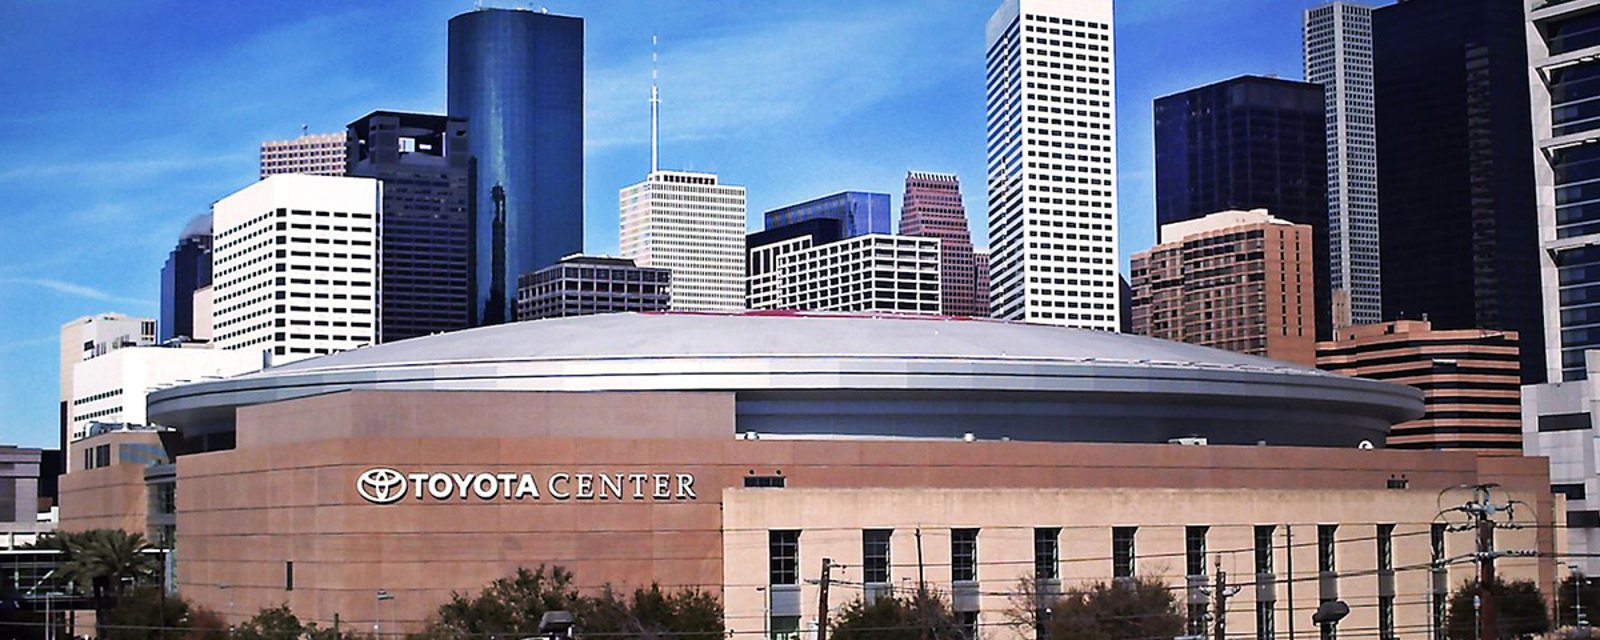 The NHL is coming to Houston